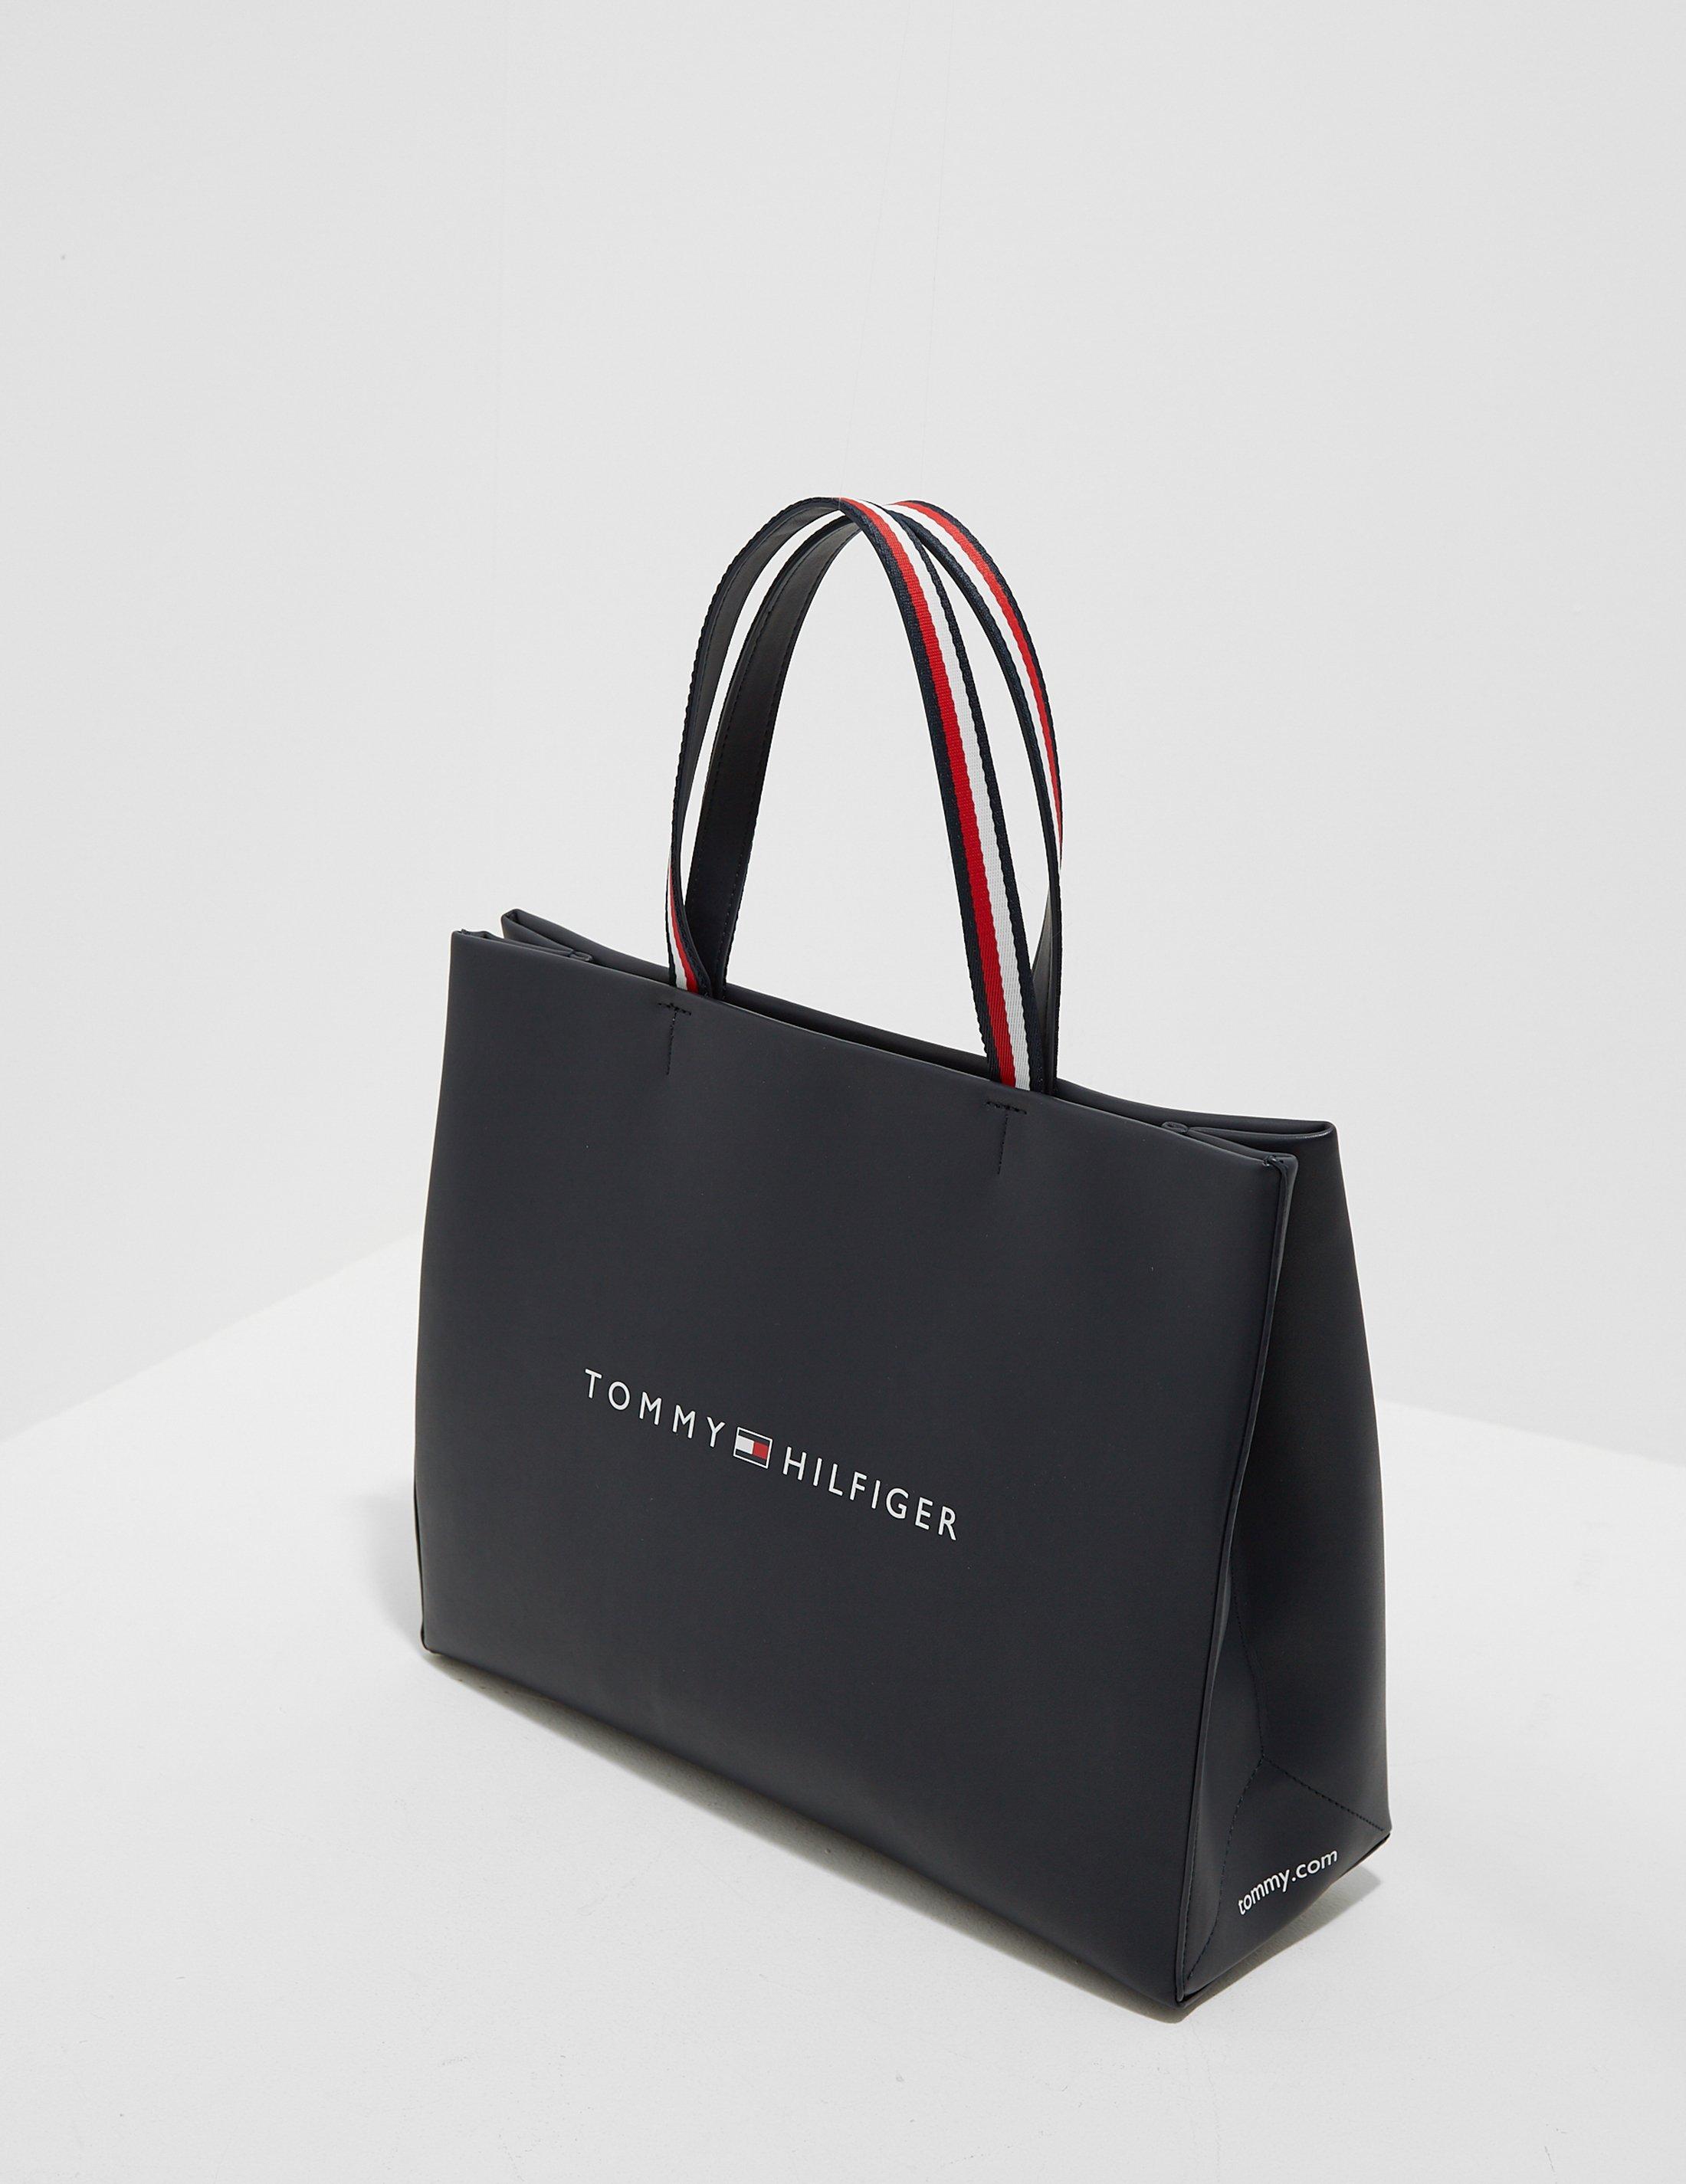 Tommy Hilfiger Shopping Tote Bag Navy Blue - Lyst